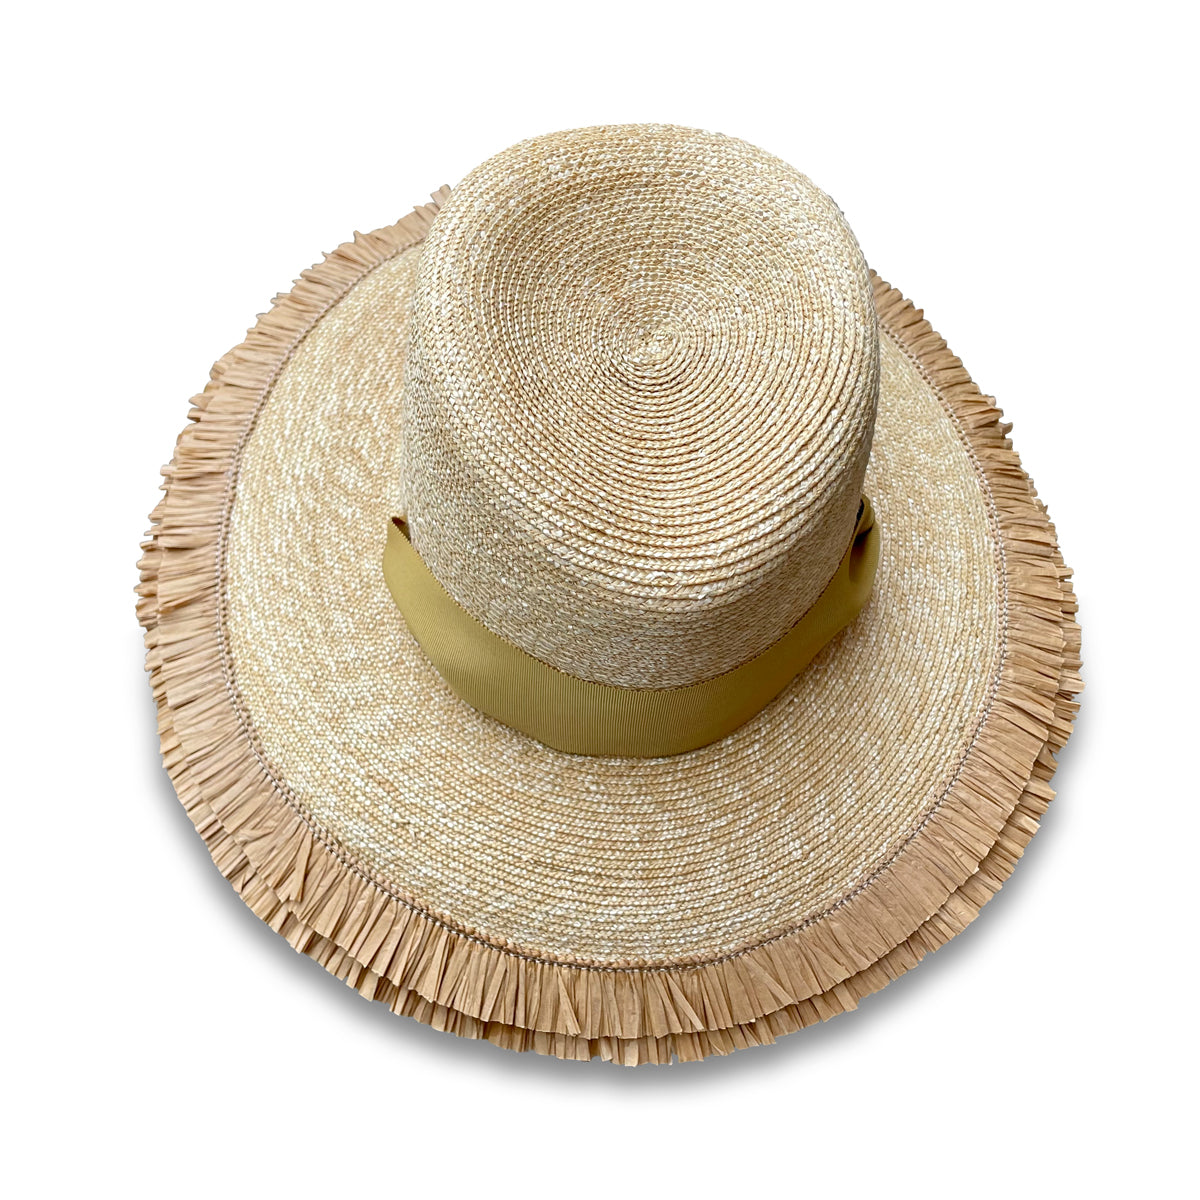 Wheat Straw Beach hat. View from the top. Brim features a double row of Raffia fringe. The hat has two grommets on each side of the crown with a matching ribbon threaded through. The ribbon acts as a chin ribbon.  